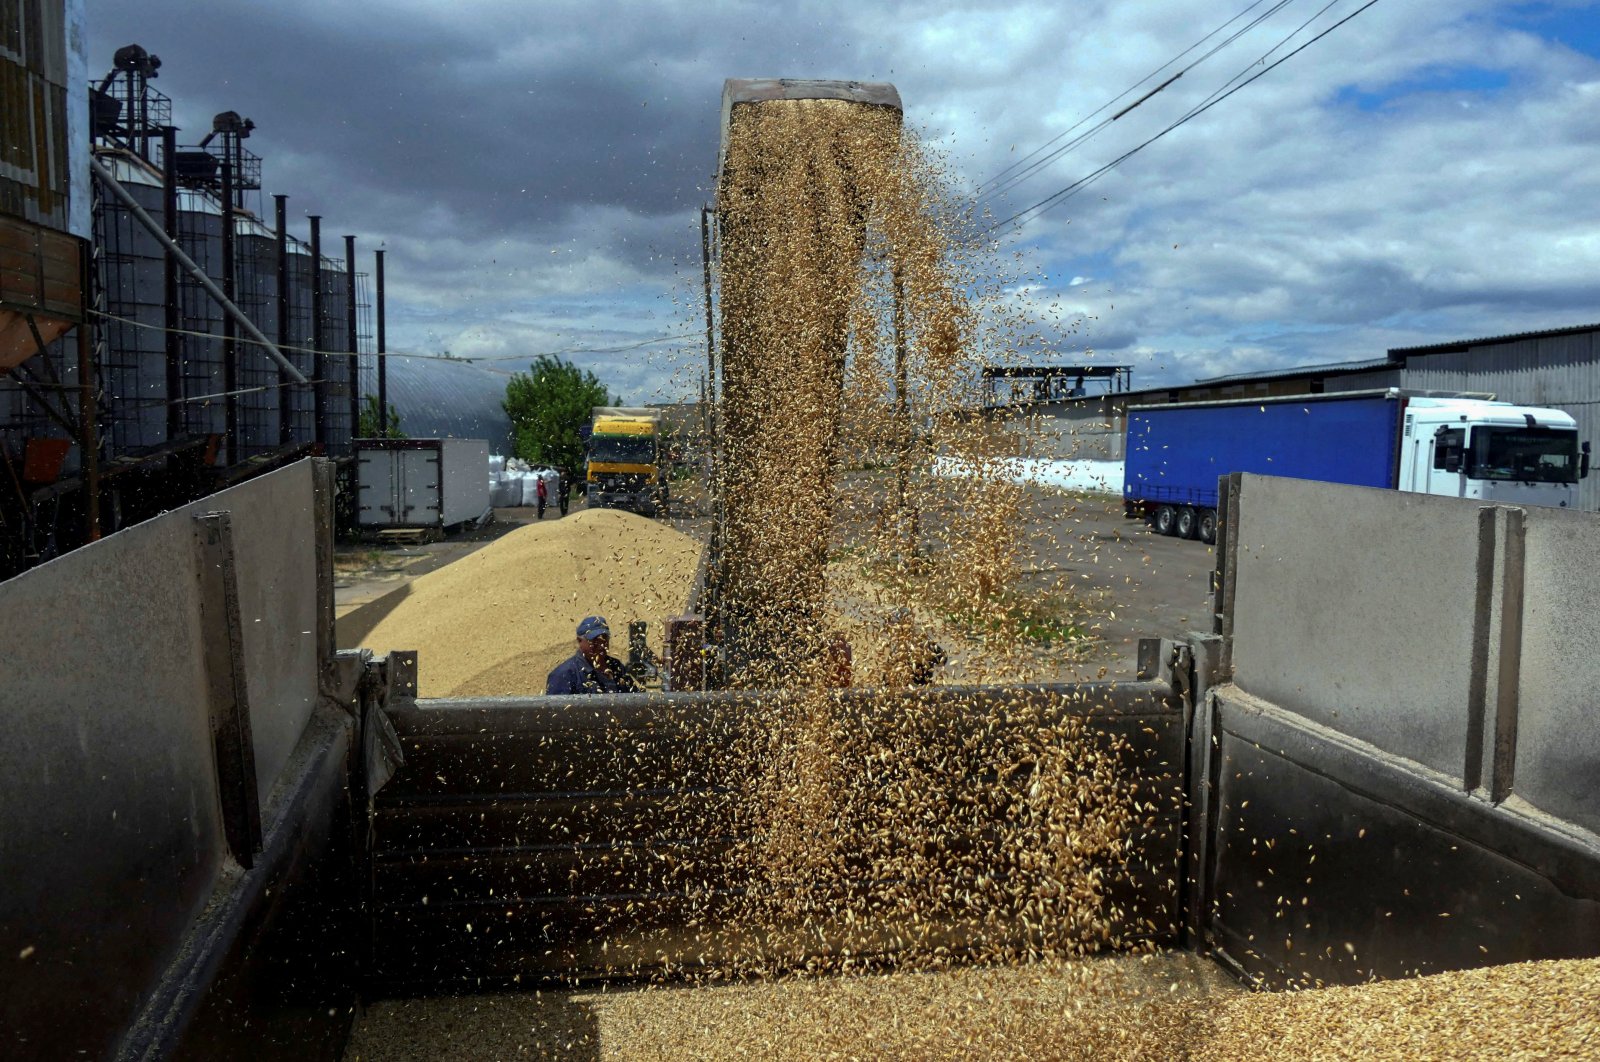 A worker loads a truck with grain at a terminal during barley harvesting in Odesa region, Ukraine, June 23, 2022. (Reuters Photo)